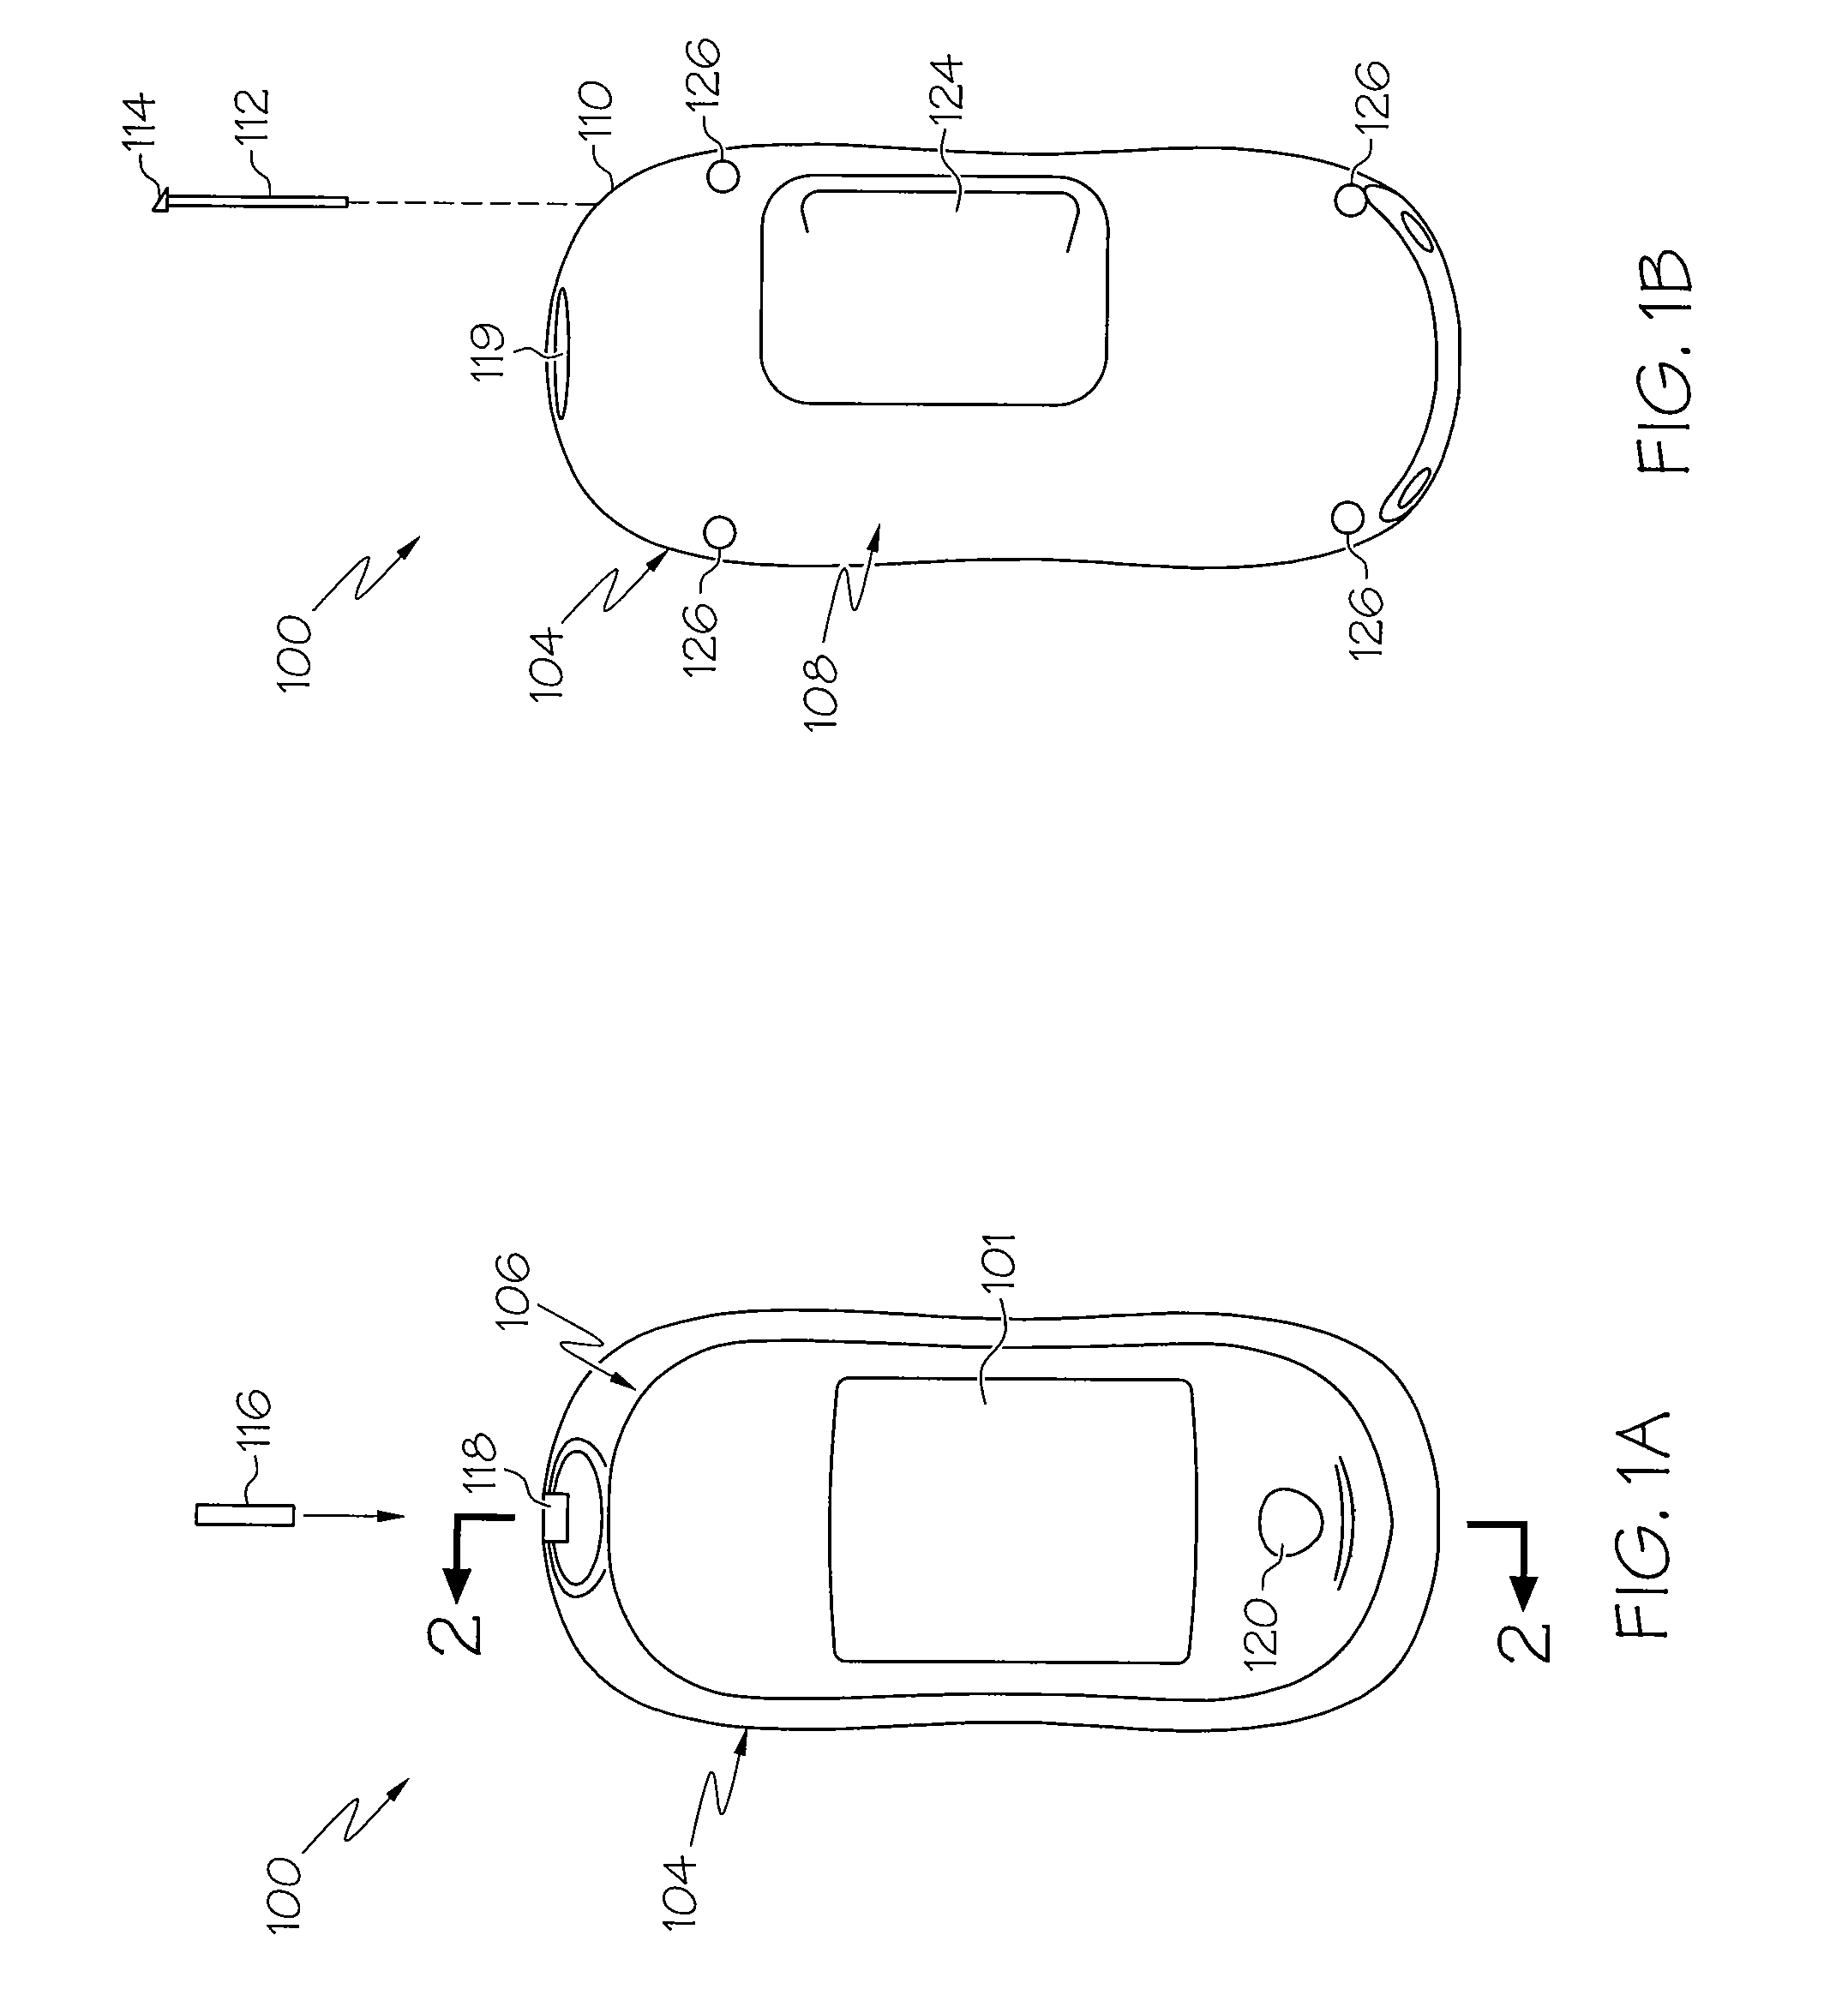 Enclosure to prevent fluid ingress of a device having a touch screen interface